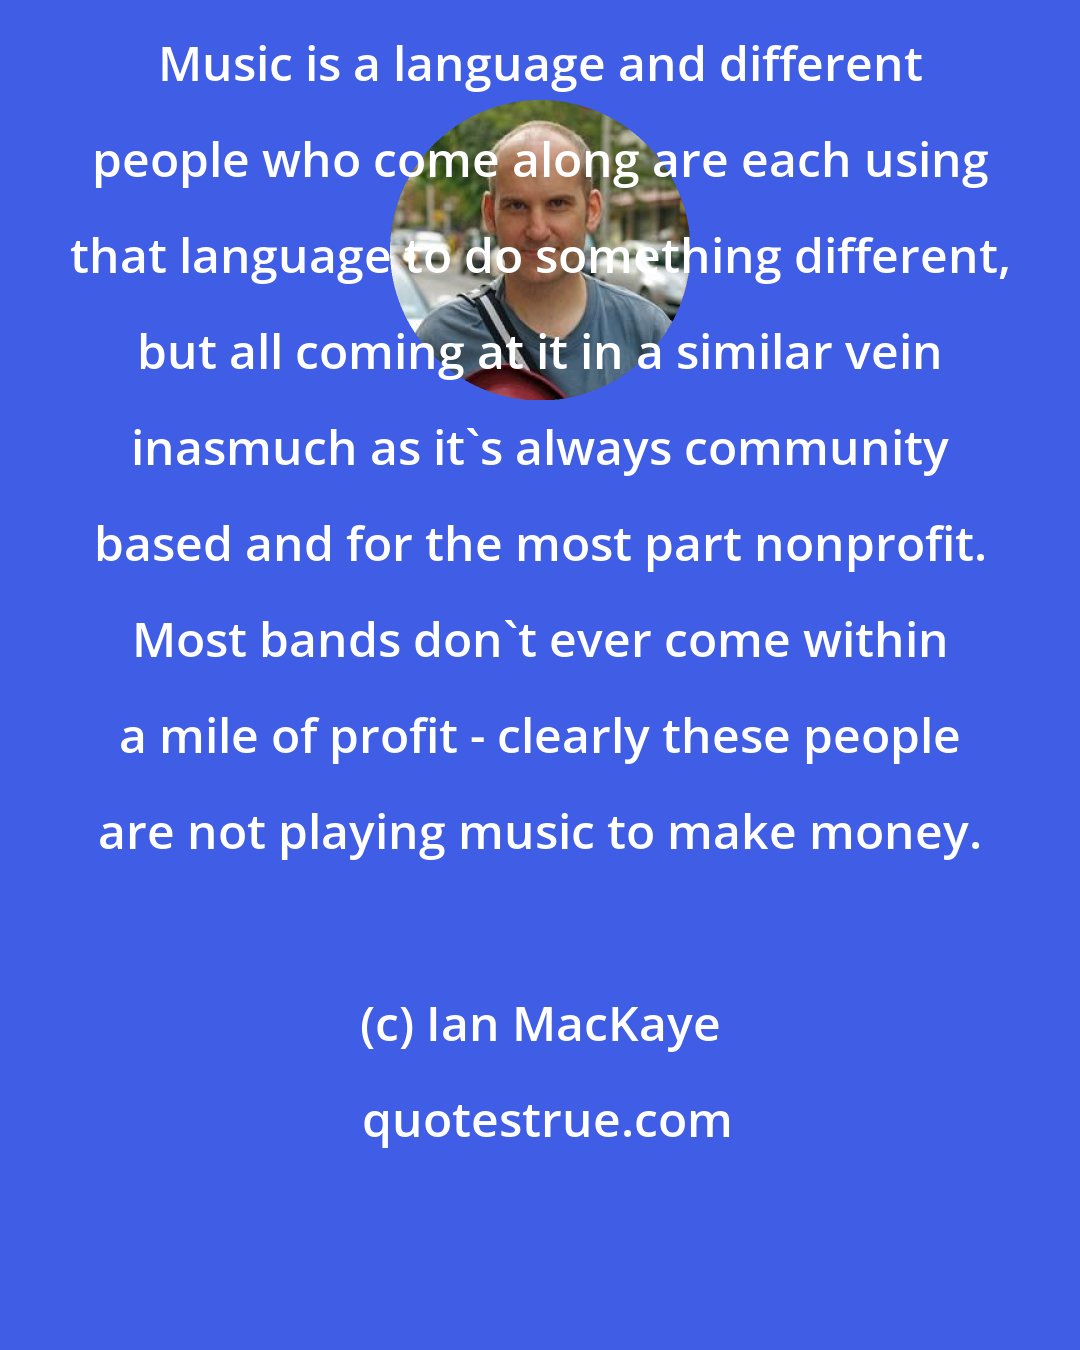 Ian MacKaye: Music is a language and different people who come along are each using that language to do something different, but all coming at it in a similar vein inasmuch as it's always community based and for the most part nonprofit. Most bands don't ever come within a mile of profit - clearly these people are not playing music to make money.